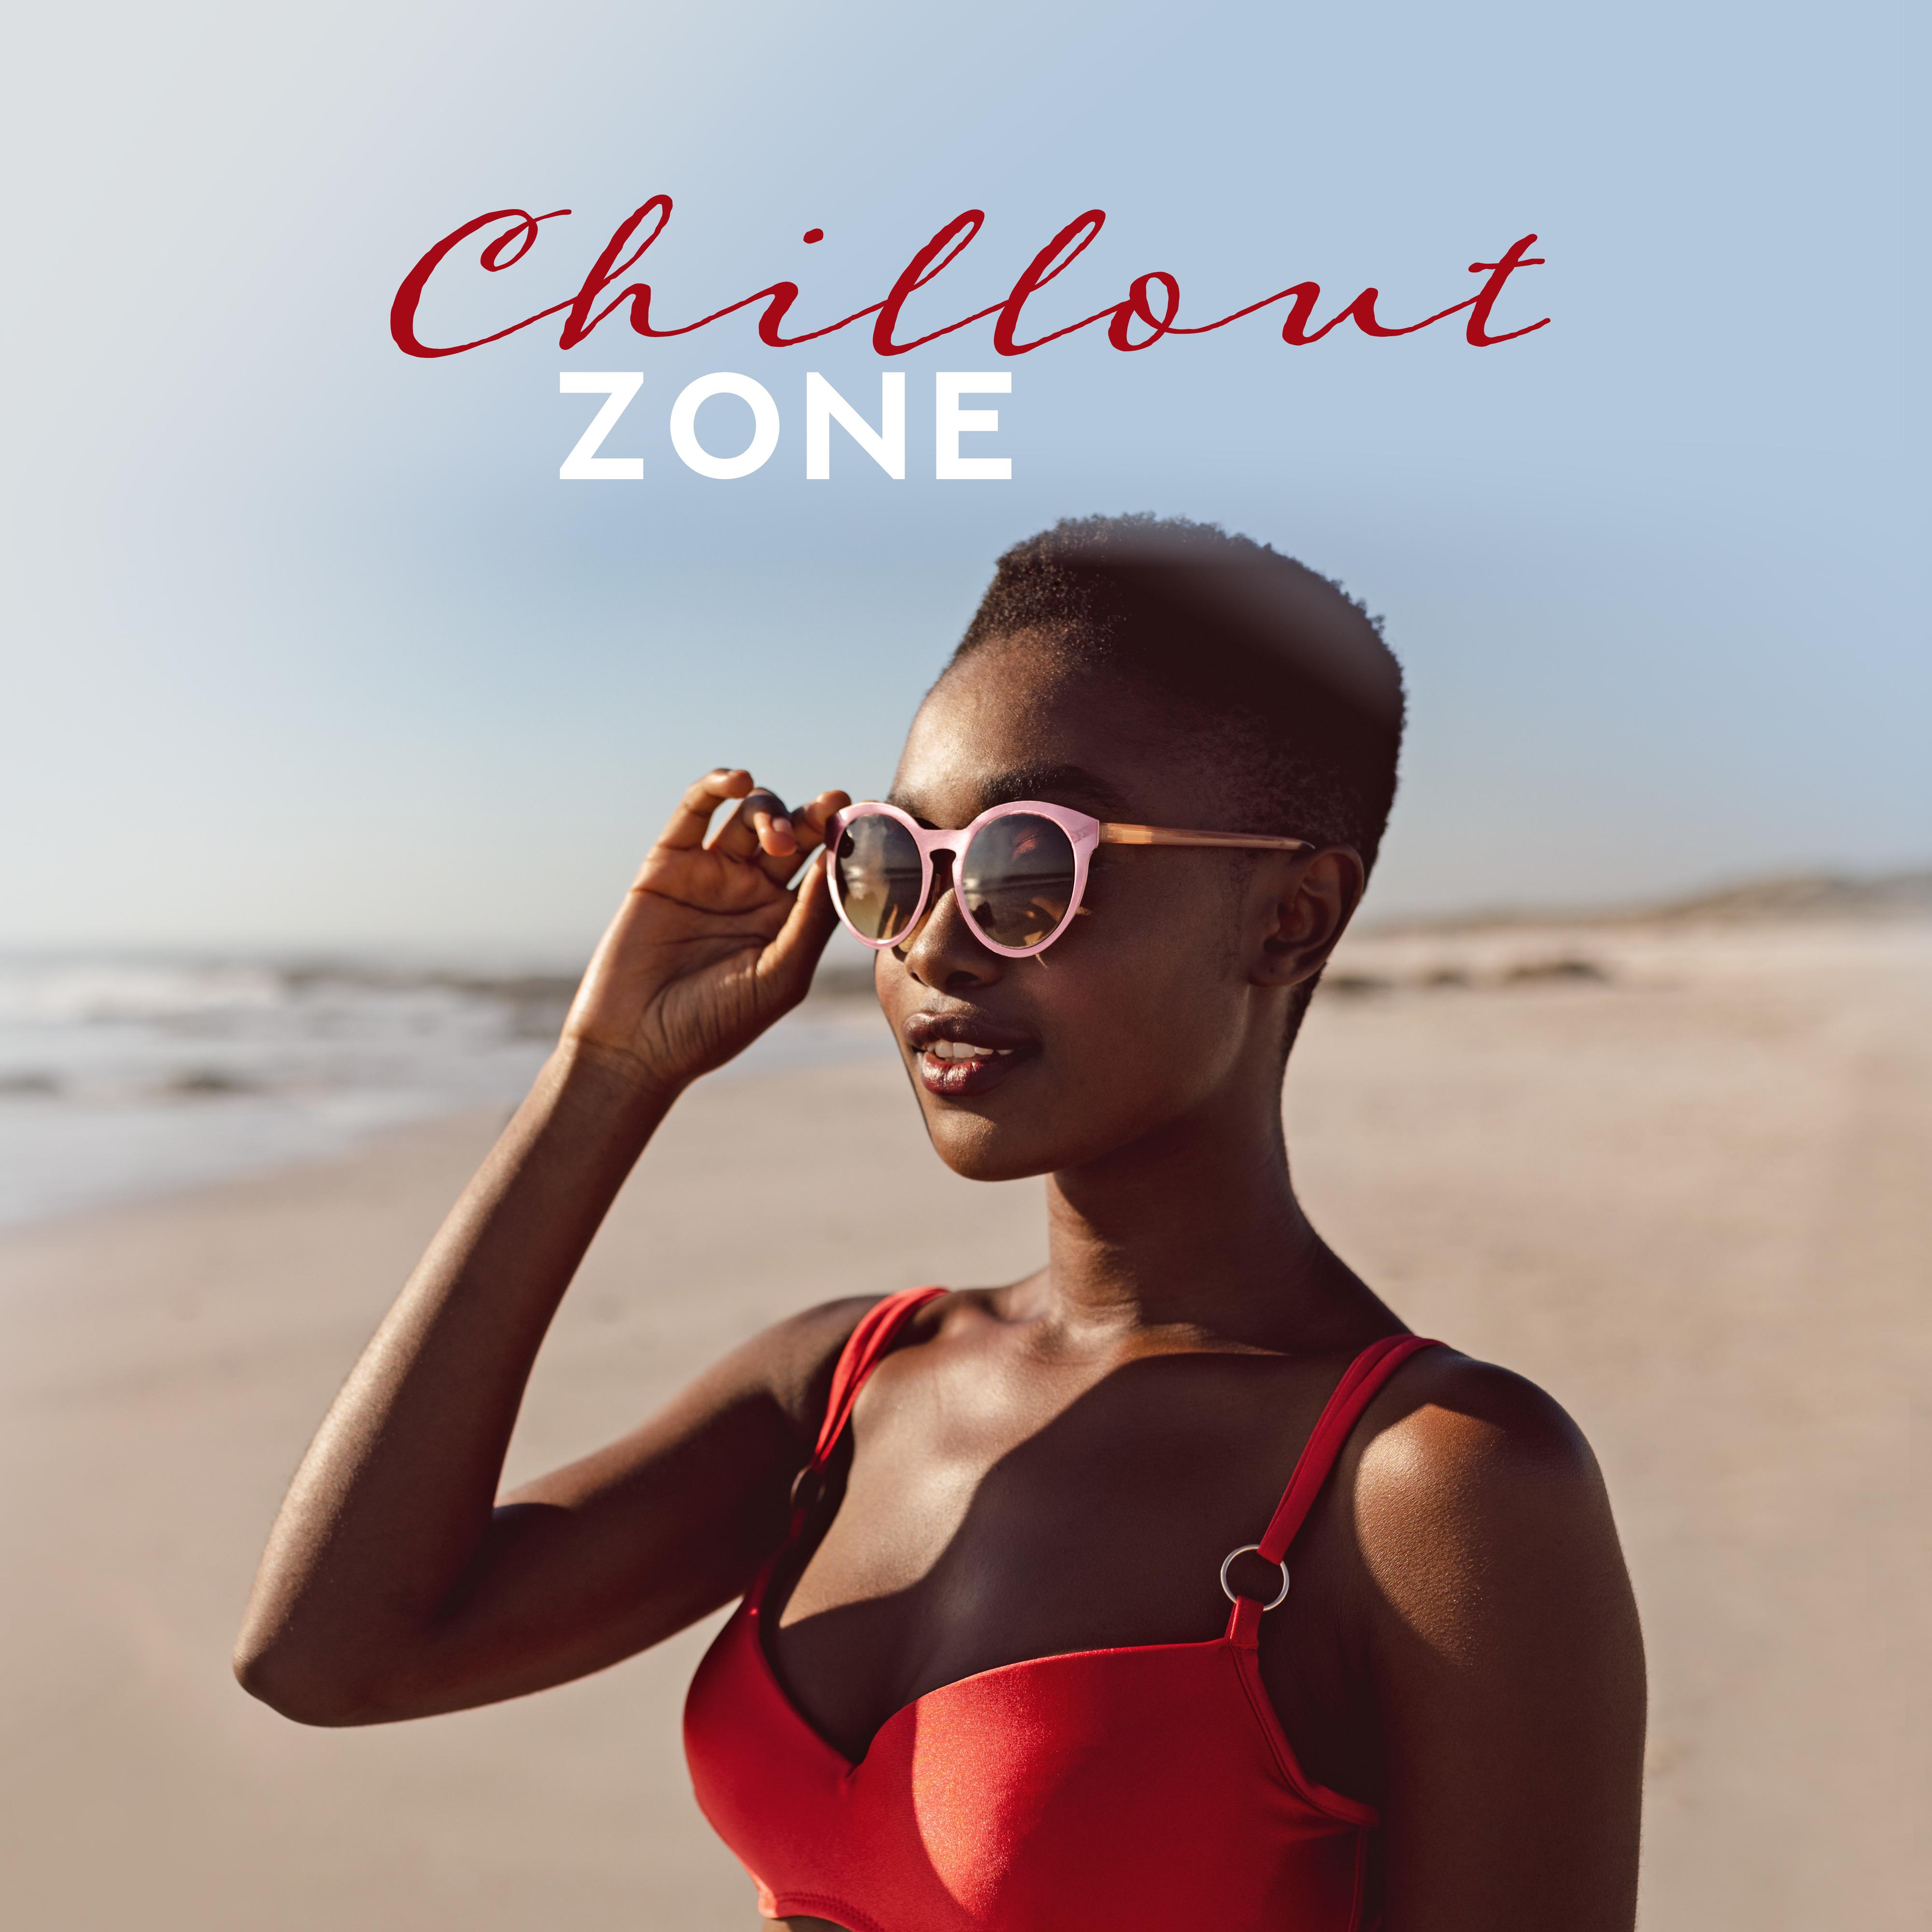 Chillout ZONE: Relax 2019, Summertime, Ibiza Chill Out, Lounge, Zen, Holiday Chill, Sunny Chillout Lounge